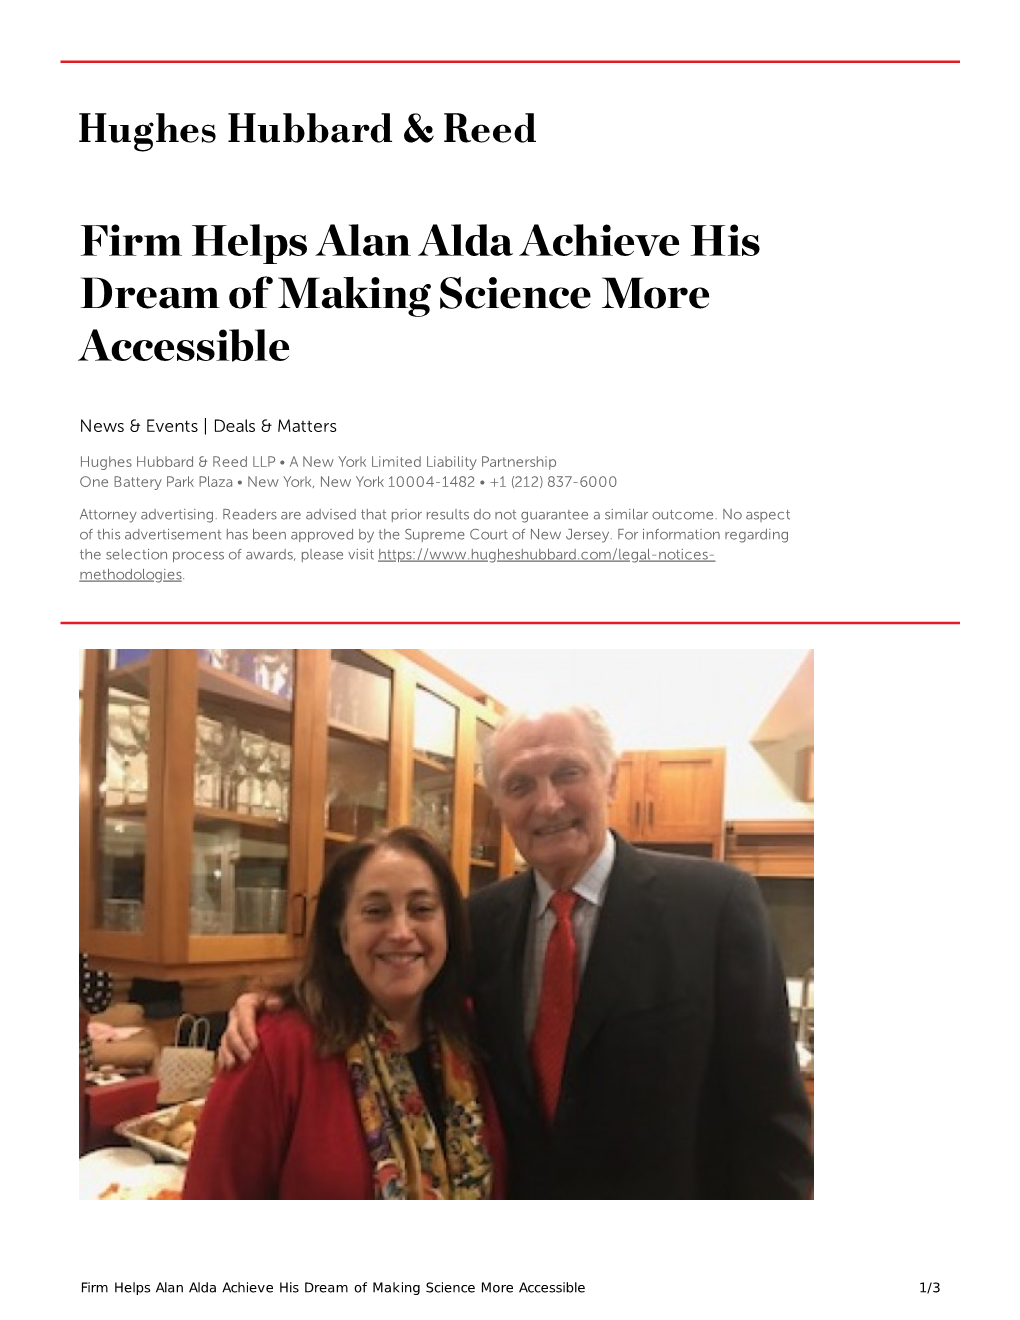 Firm Helps Alan Alda Achieve His Dream of Making Science More Accessible